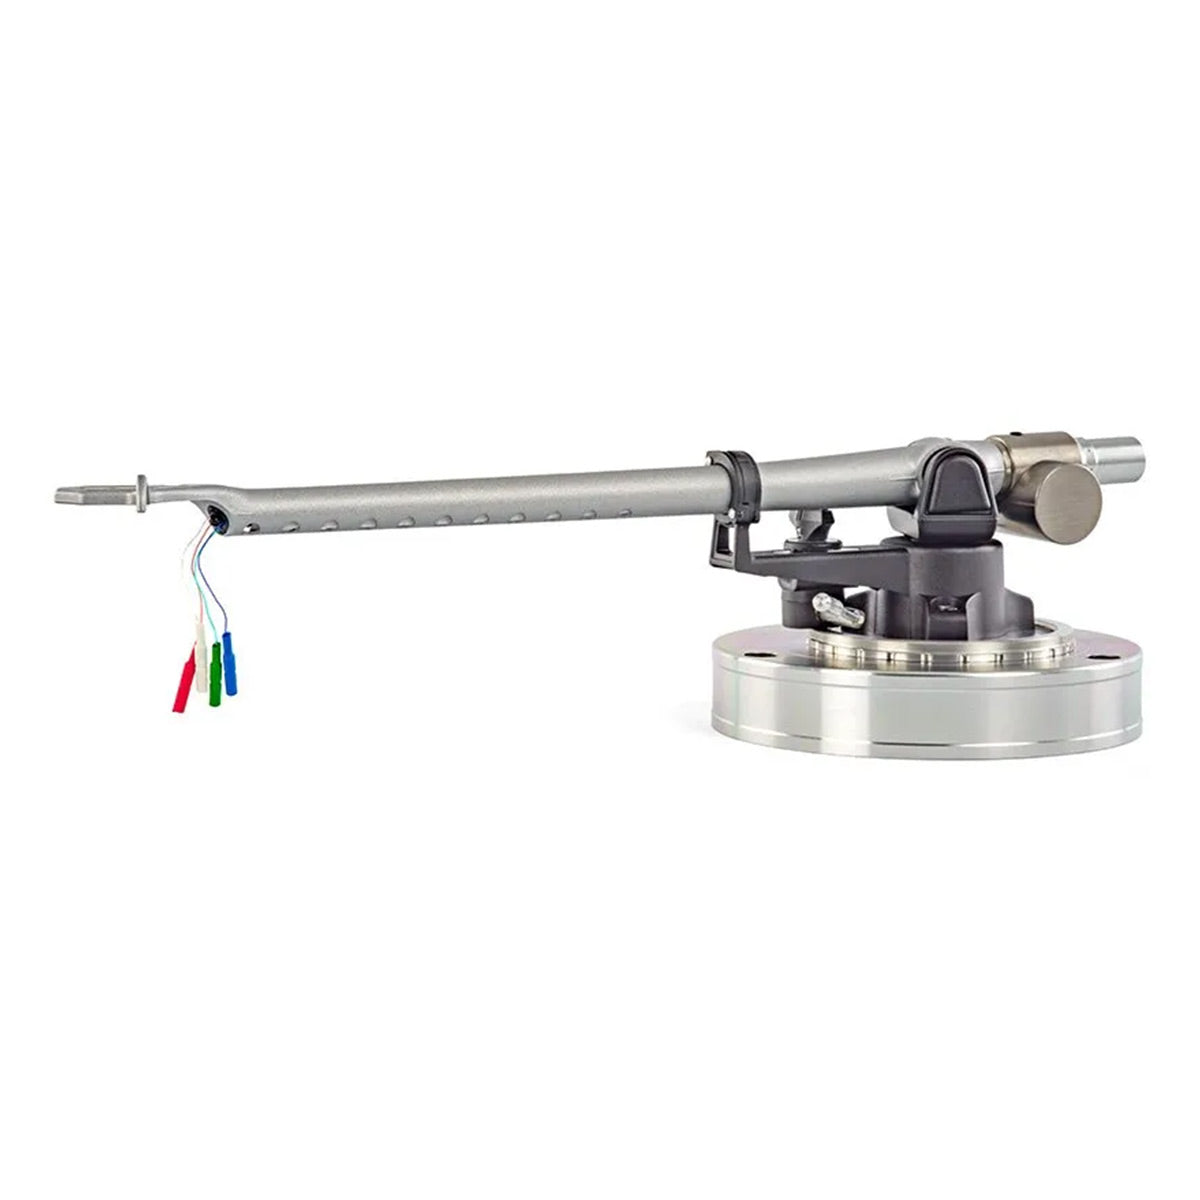 Michell Engineering Orbe Turntable with TecnoArm 2 Tonearm (Silver)